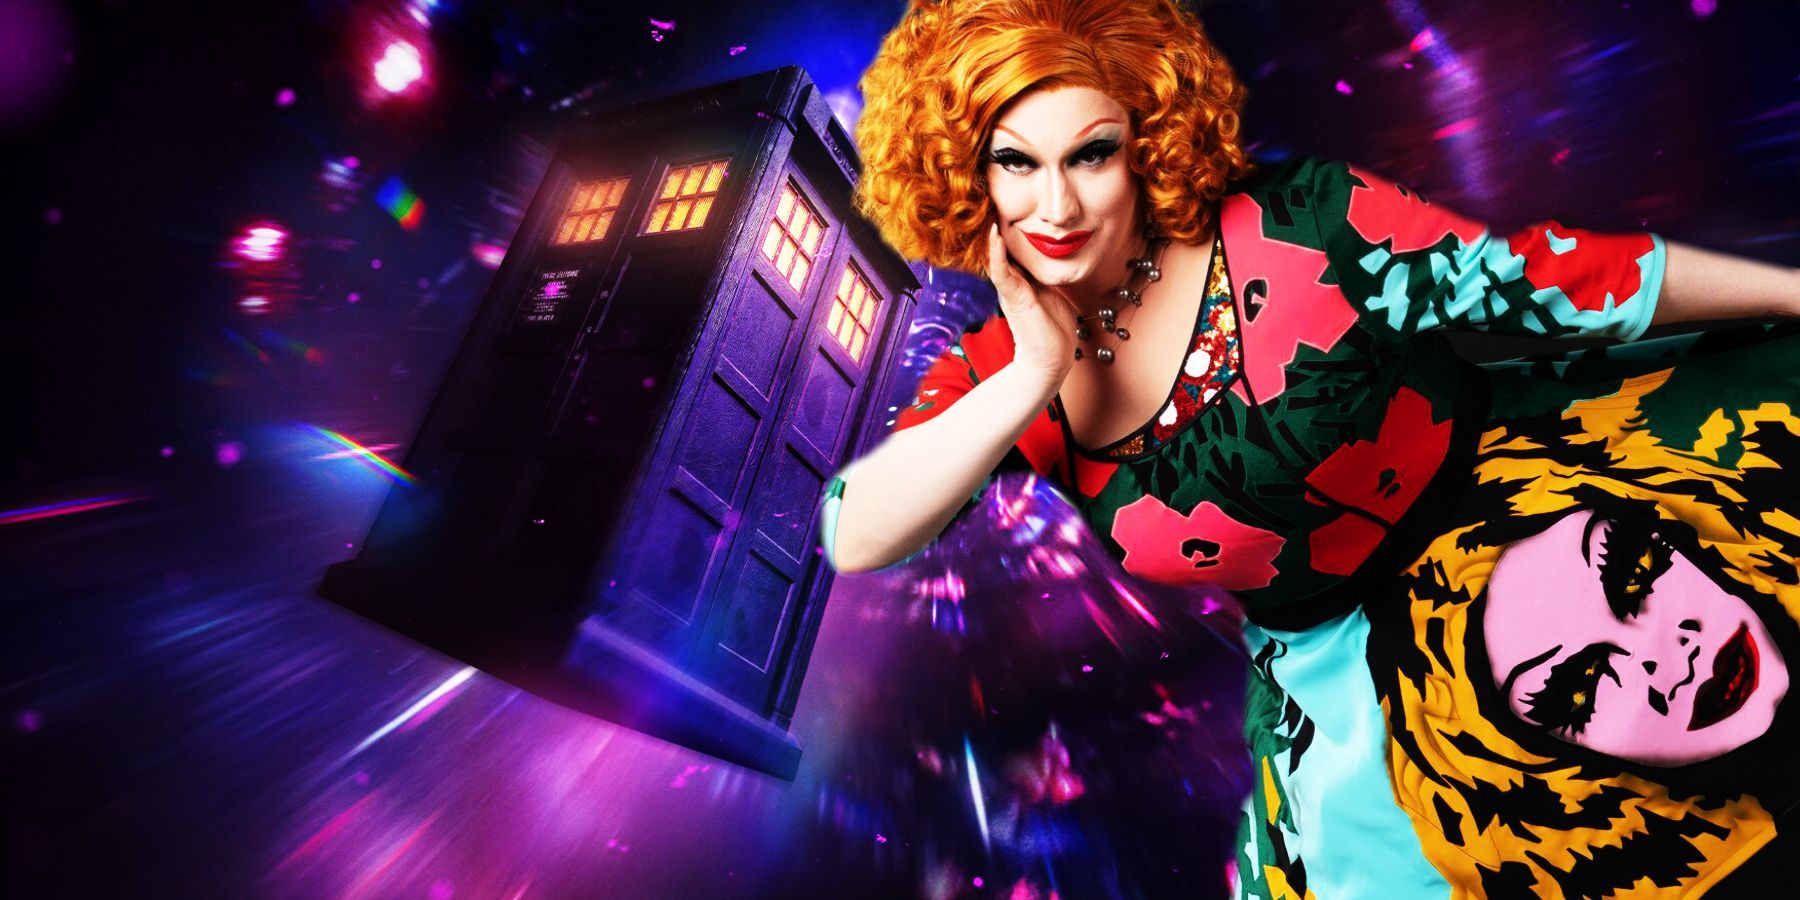 JInkx Monsoon and the TARDIS from Doctor Who